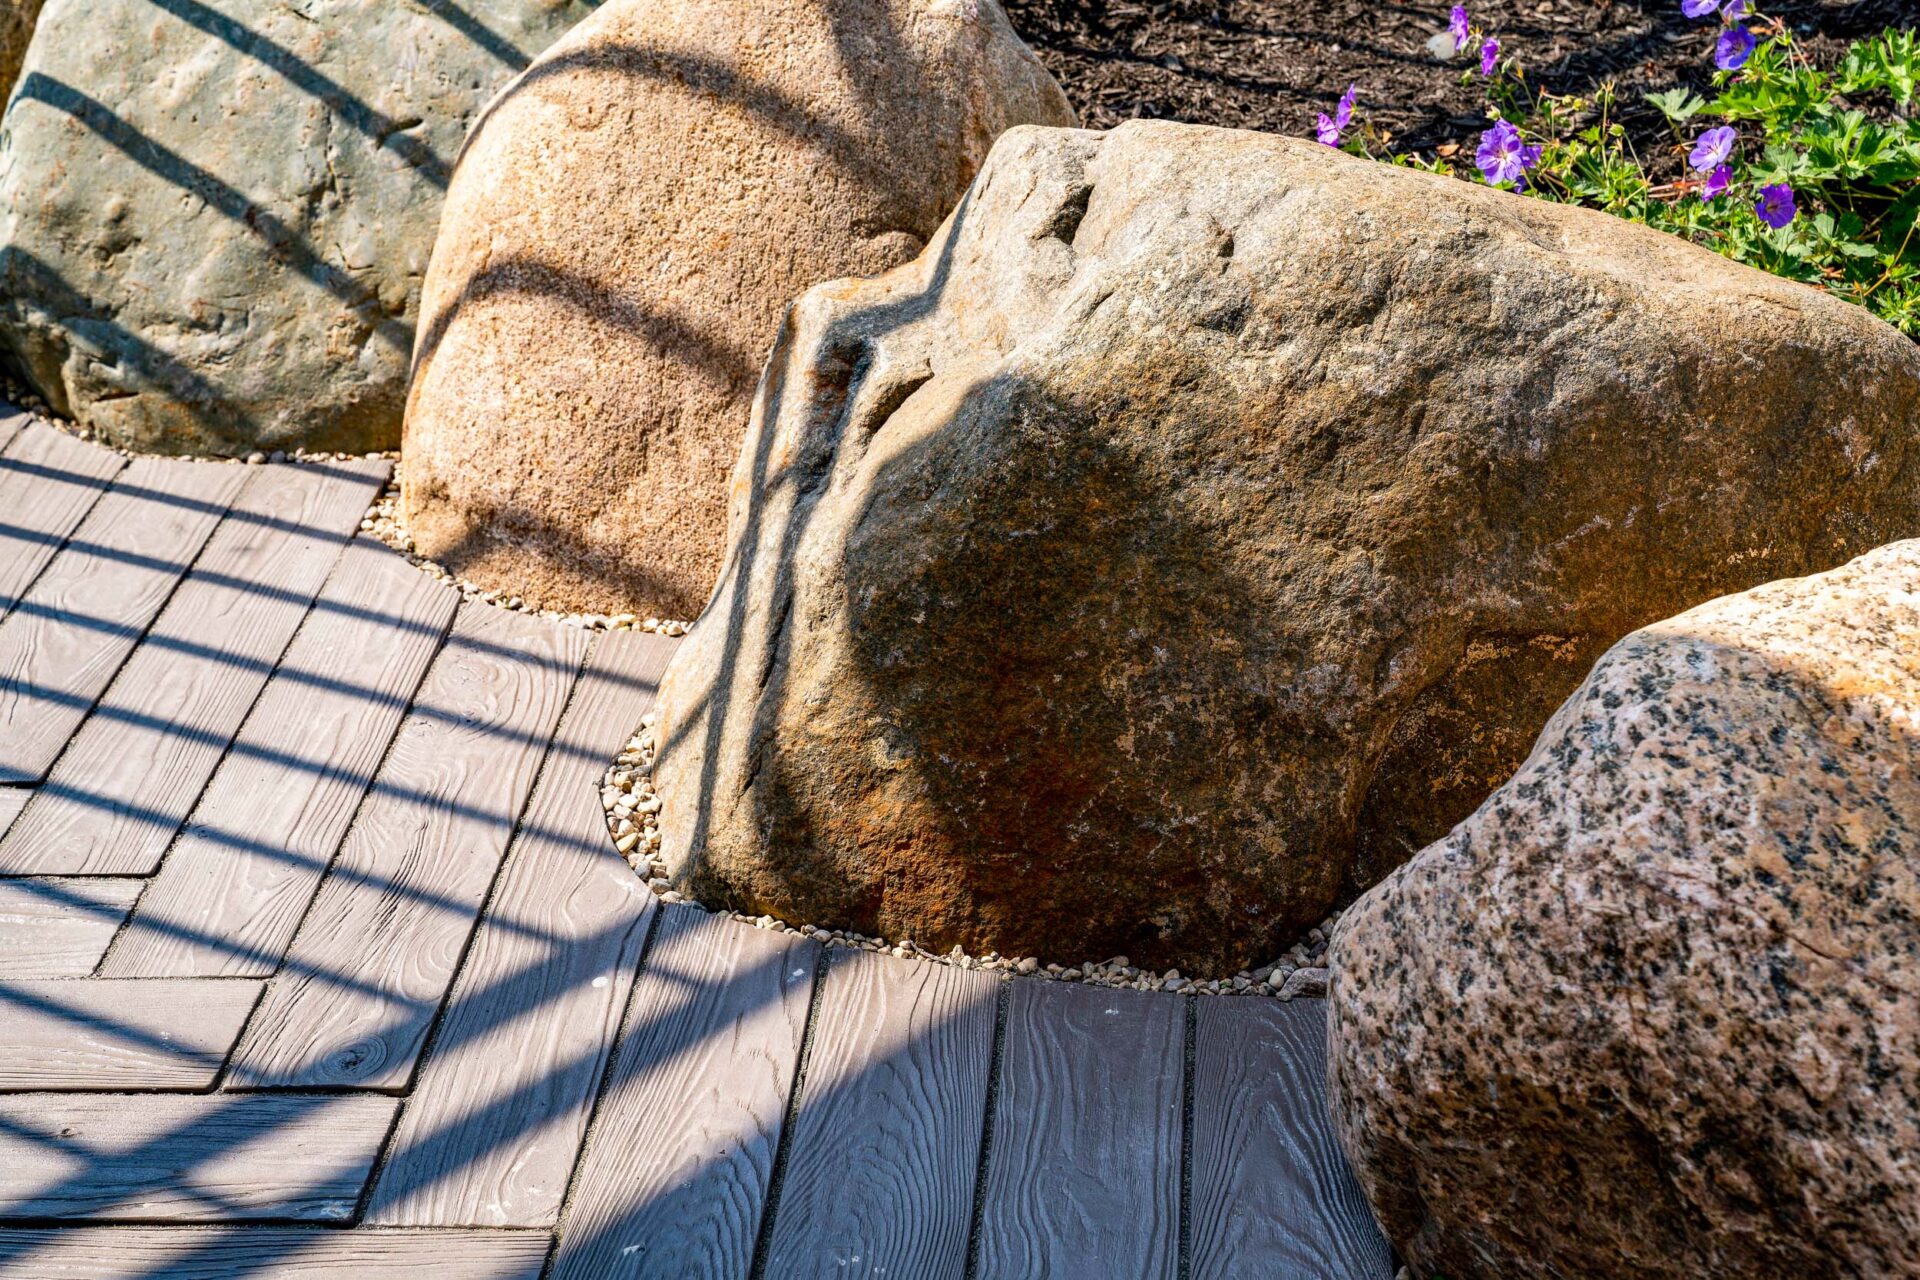 The image shows large rocks positioned beside a wooden boardwalk with shadows creating patterns, complemented by purple flowers in the background.